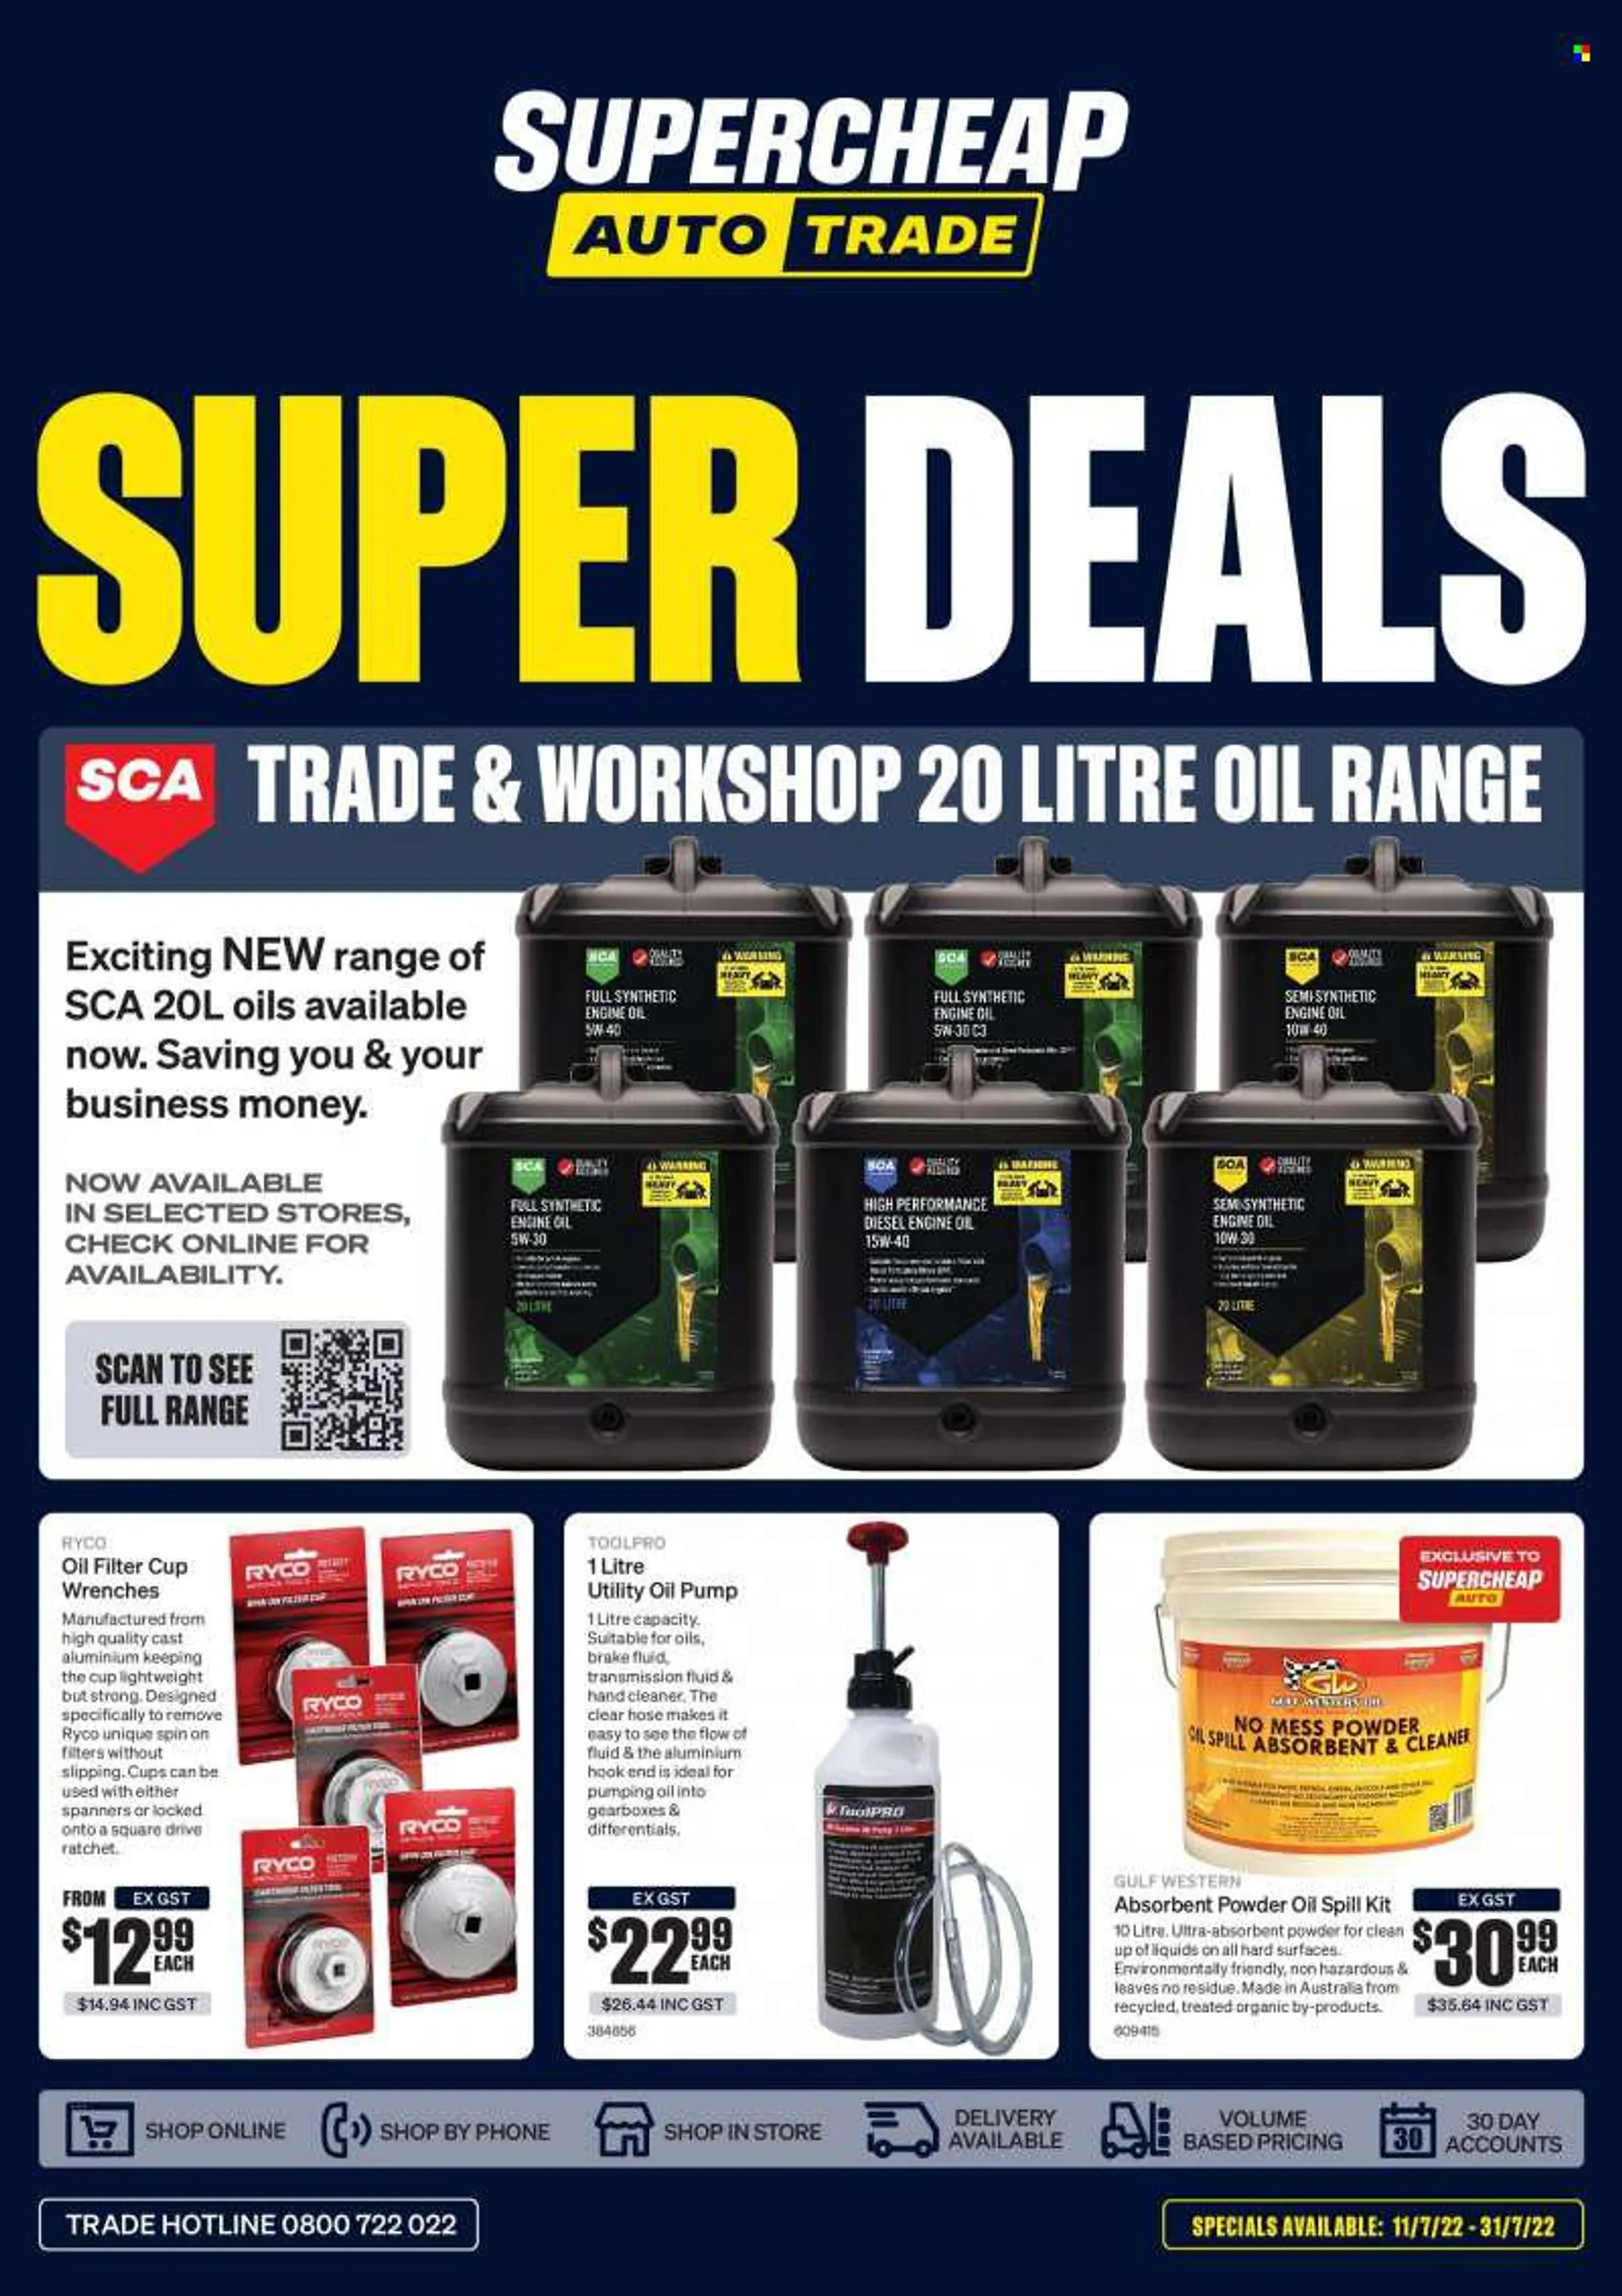 SuperCheap Auto mailer - 11.07.2022 - 31.07.2022 - Sales products - cleaner, hook, cup, pump, wrench, oil filter, transmission fluid, brake fluid. Page 1.